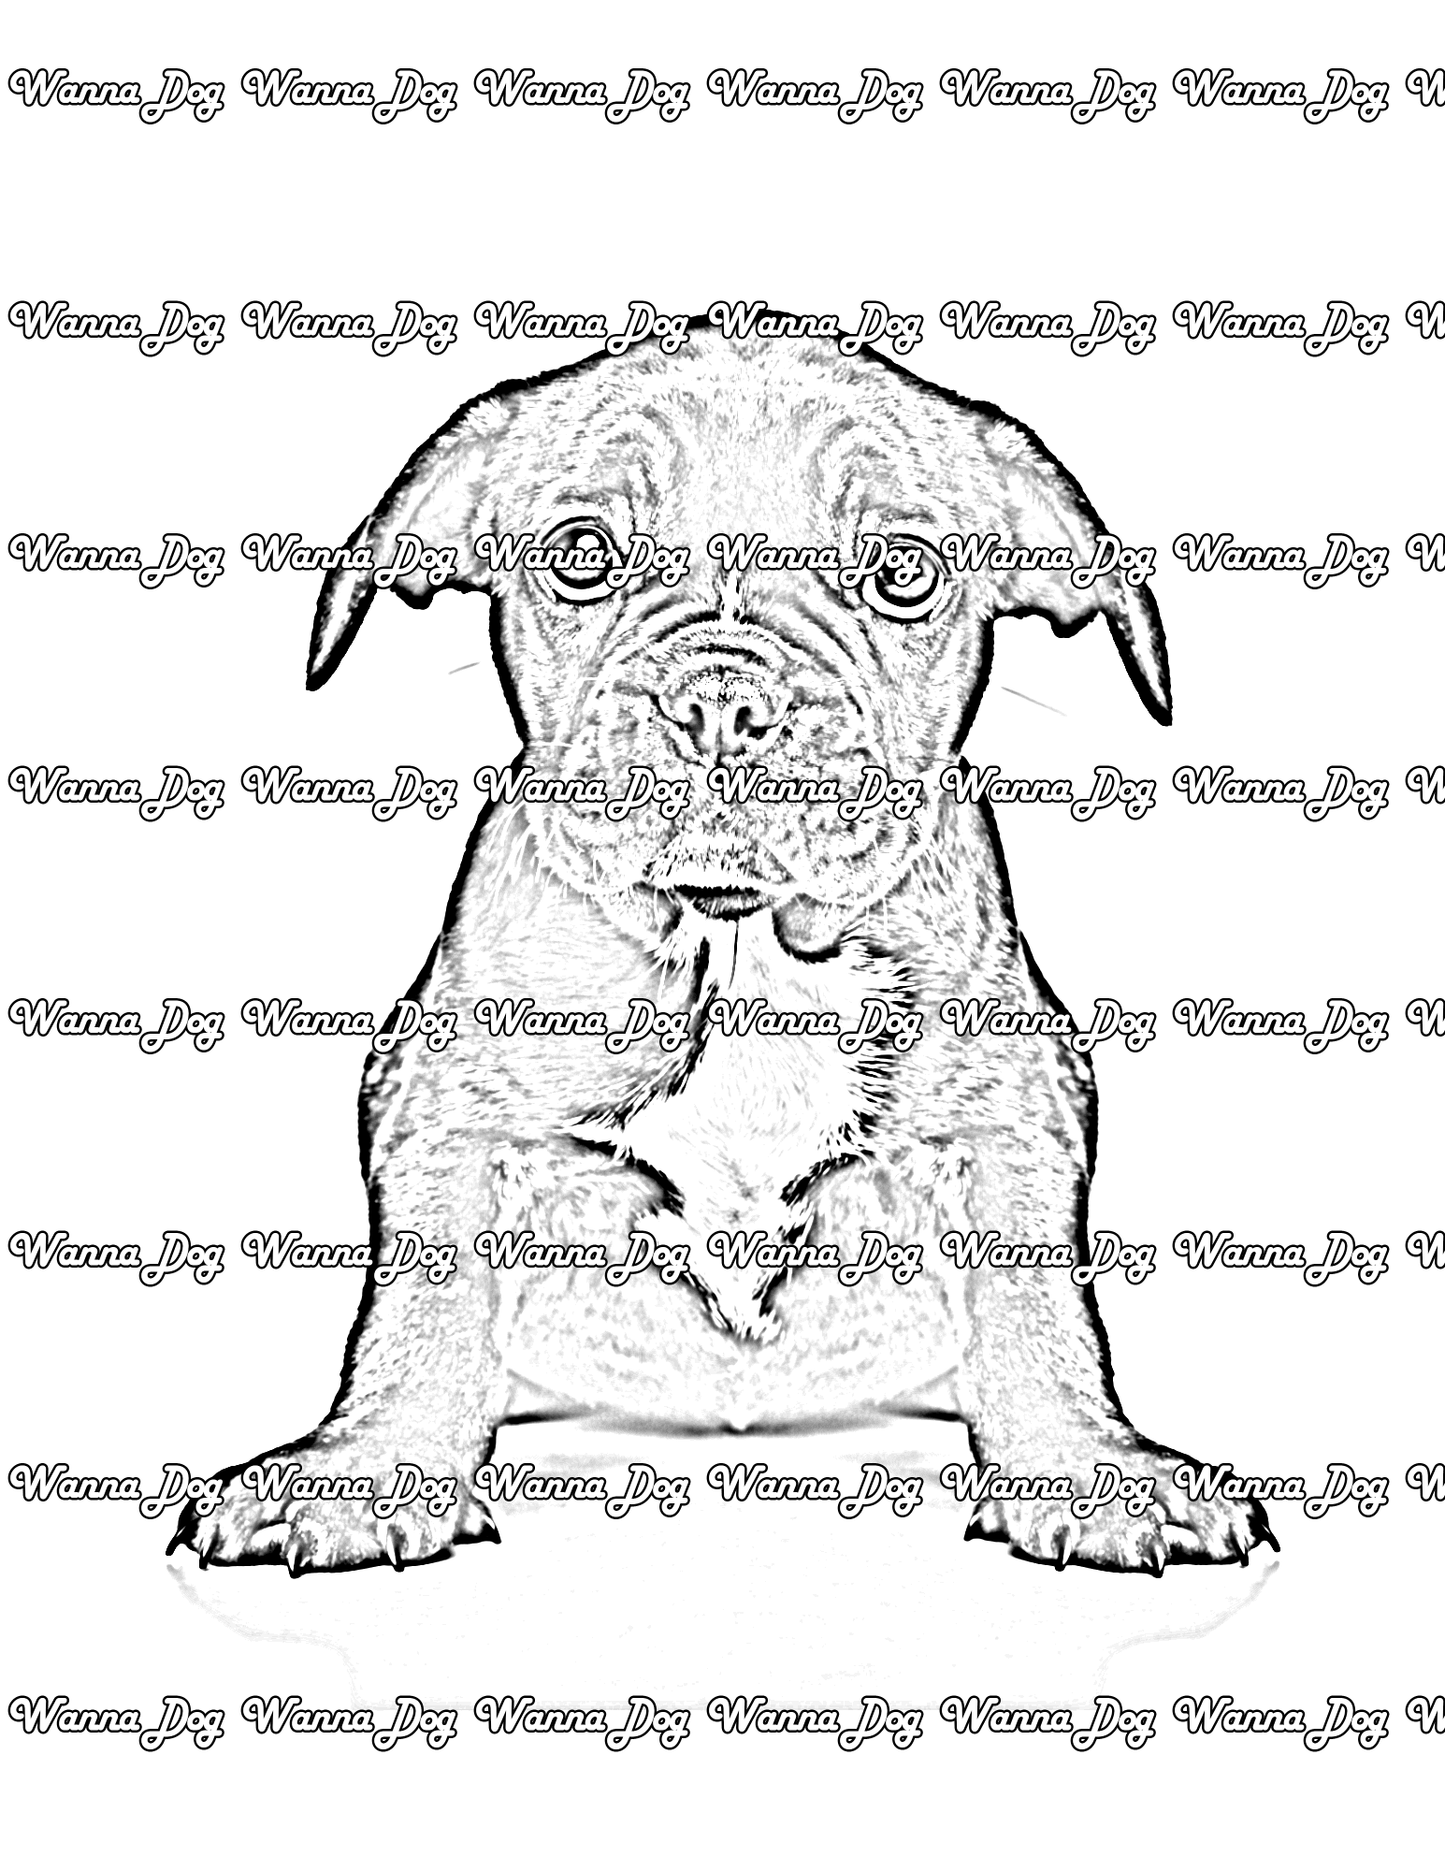 French Bulldog Puppy Coloring Page of a French Bulldog Puppy posing for the camera